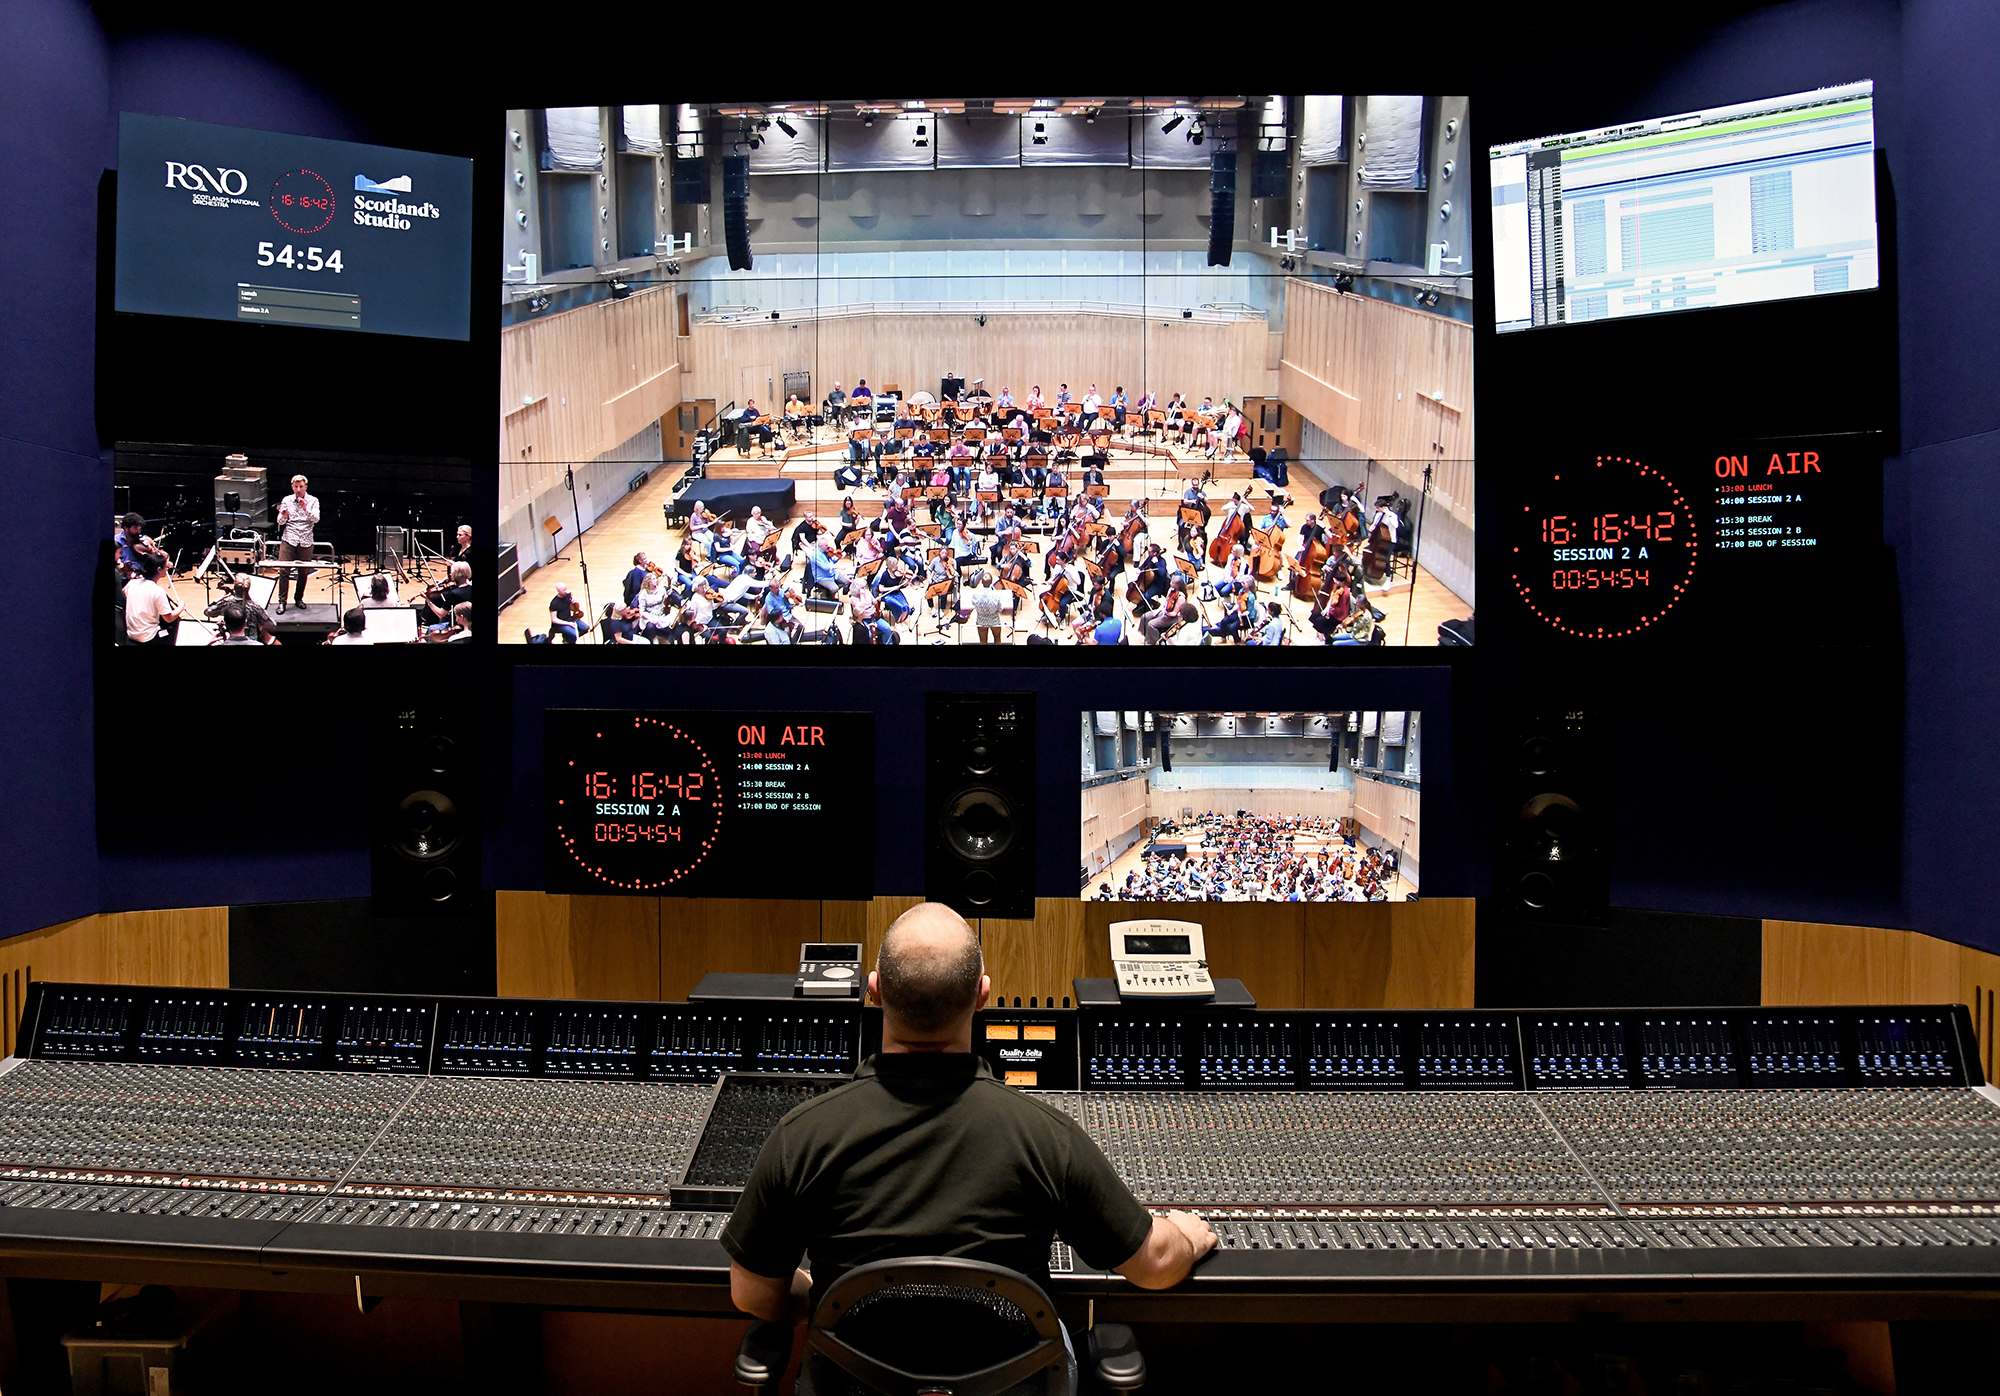 The RSNO’s studio in Glasgow is the only place in the UK to house both an orchestra and soung-o-picture facilities